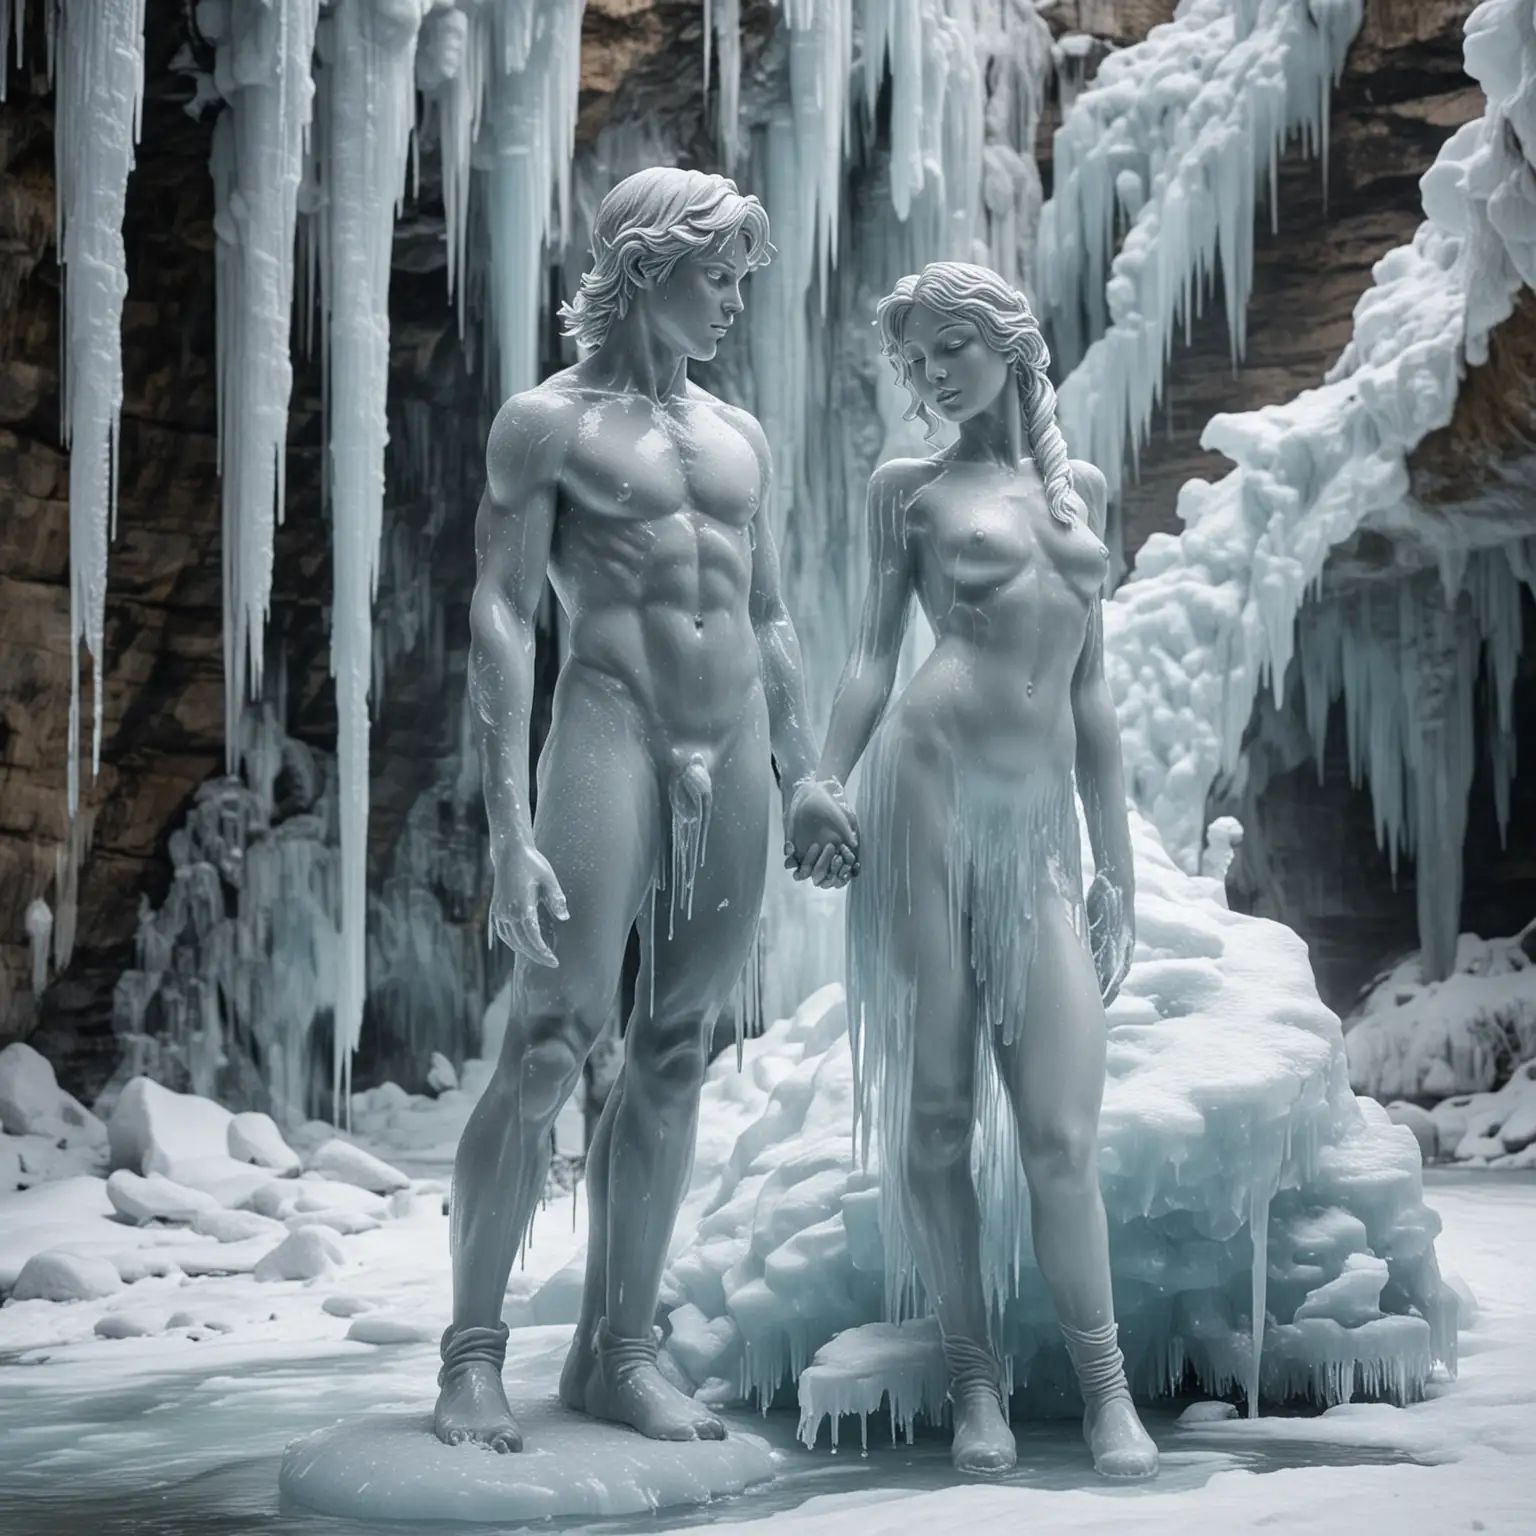 Sculpted Ice Statue Nude Boy and Girl Embracing in Frozen Waterfall